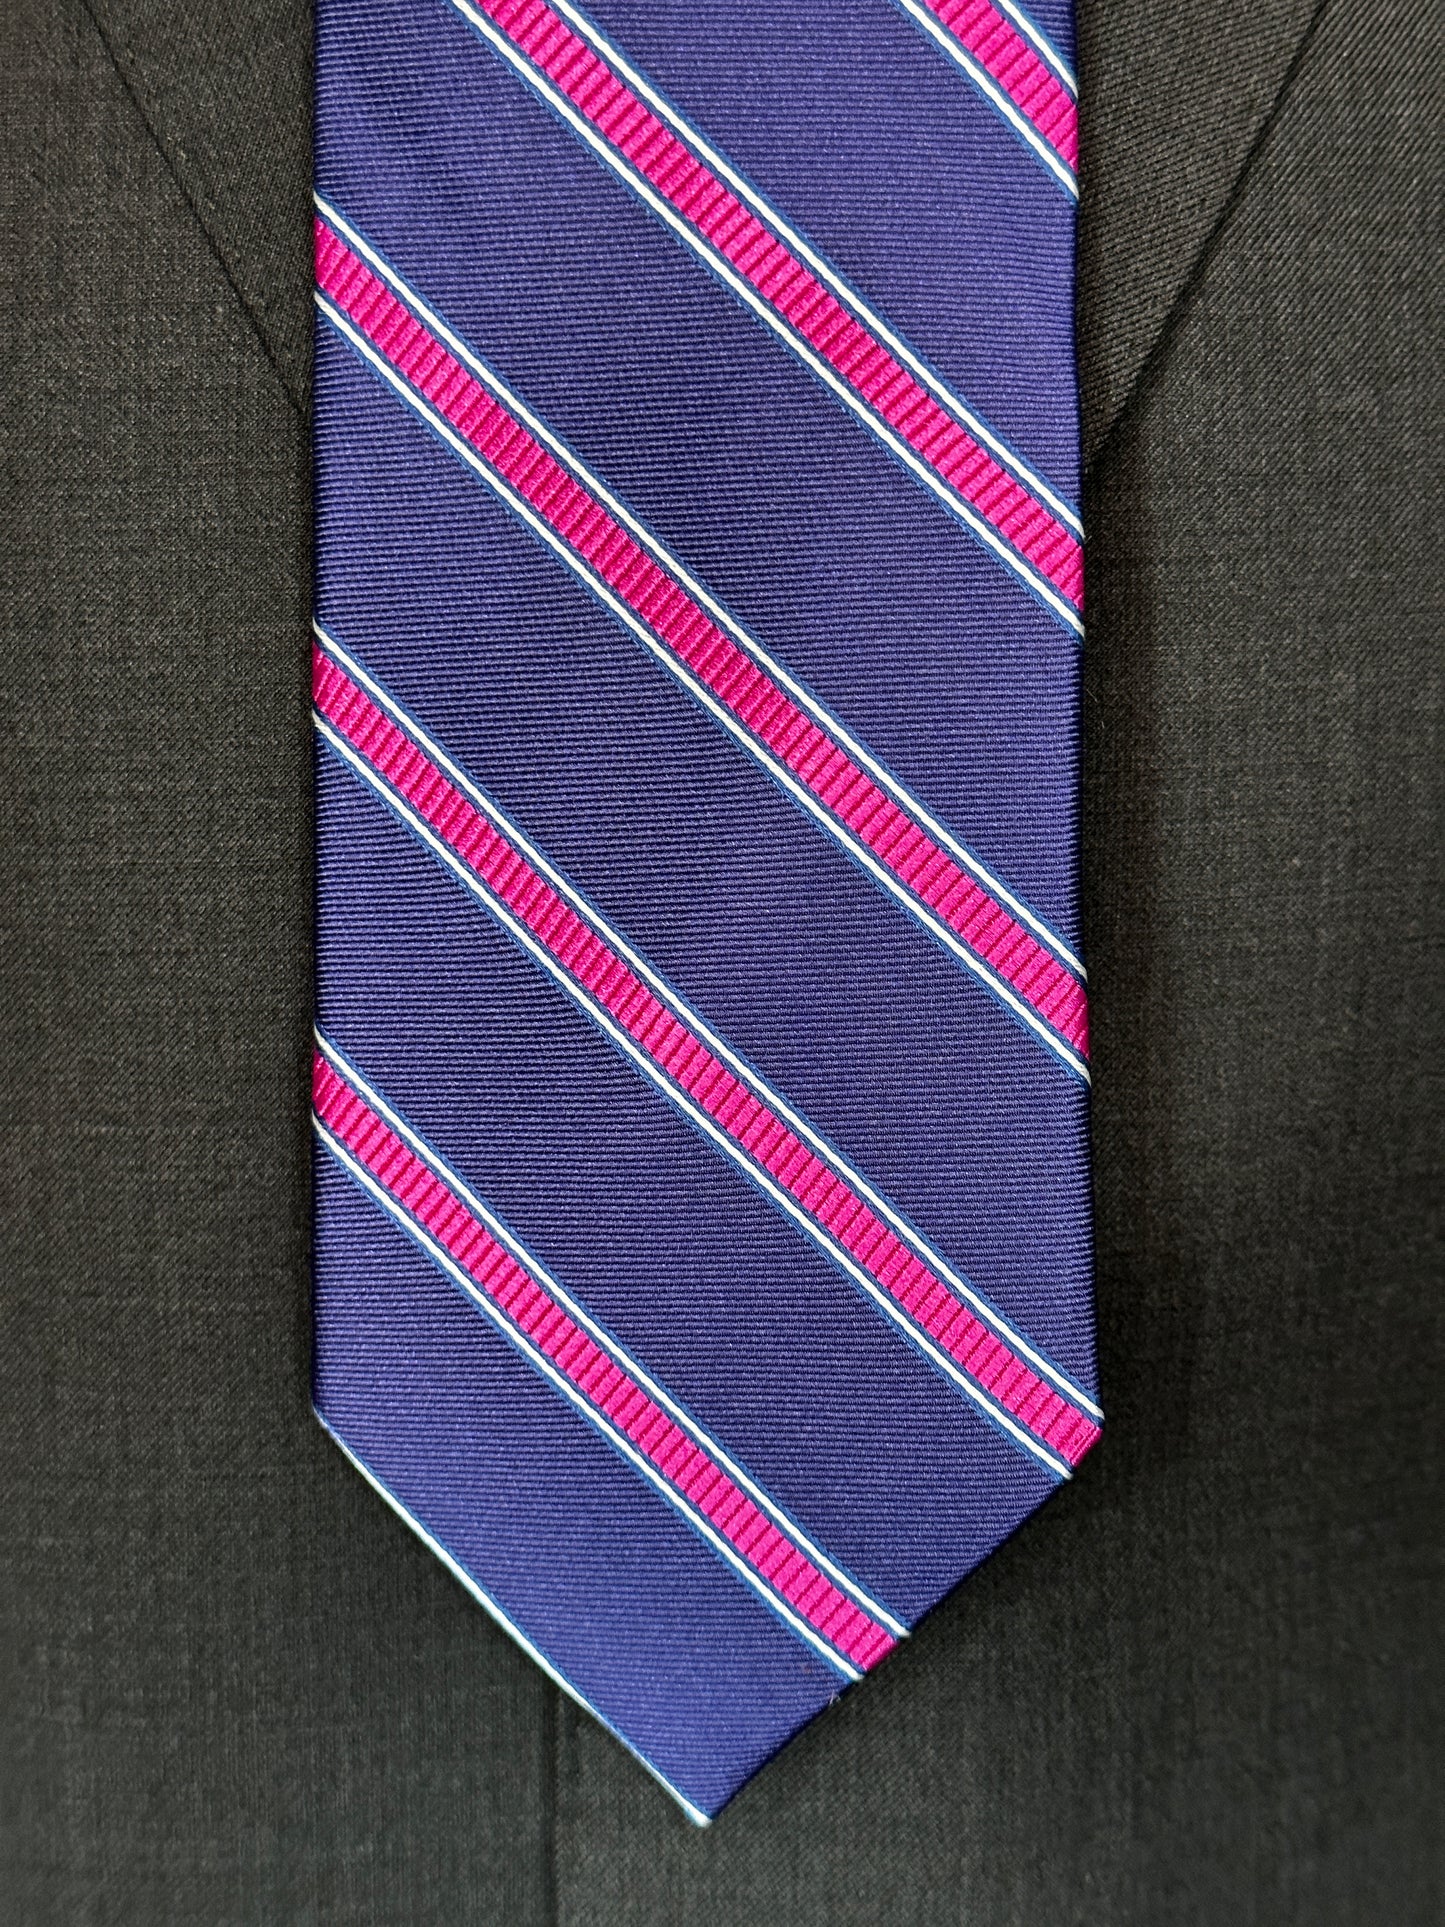 100% silk necktie in classic navy blue background with a stunning woven silk pink stripe. This tie is fantastic with the classic suits of navy, charcoal grey and pinstripes. Excellent with a crisp white french cuff shirt. 